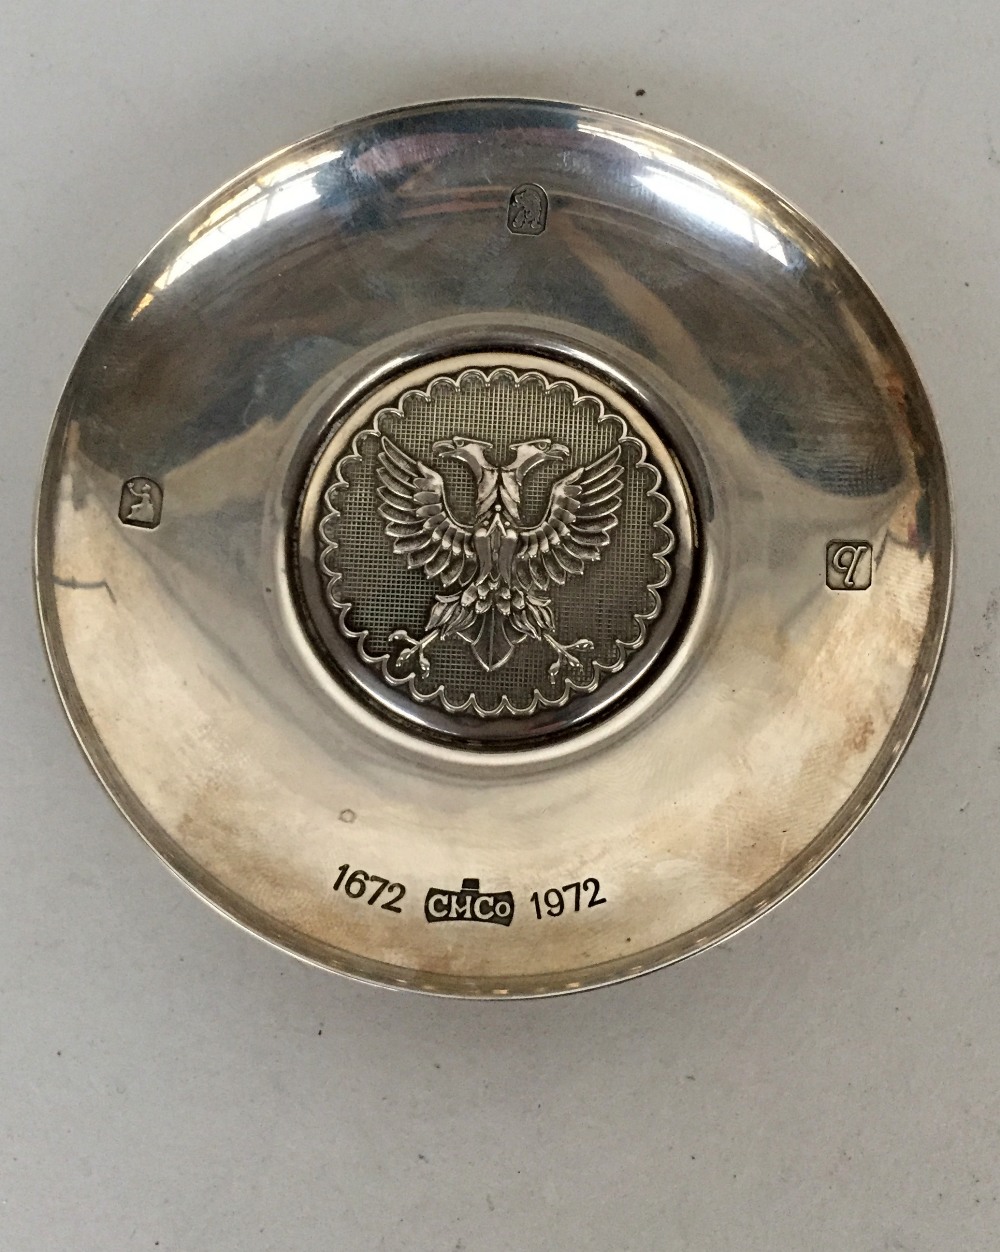 A silver coin/pin dish made to commemorate 300 years of Hoare's bank, manufactured by C.